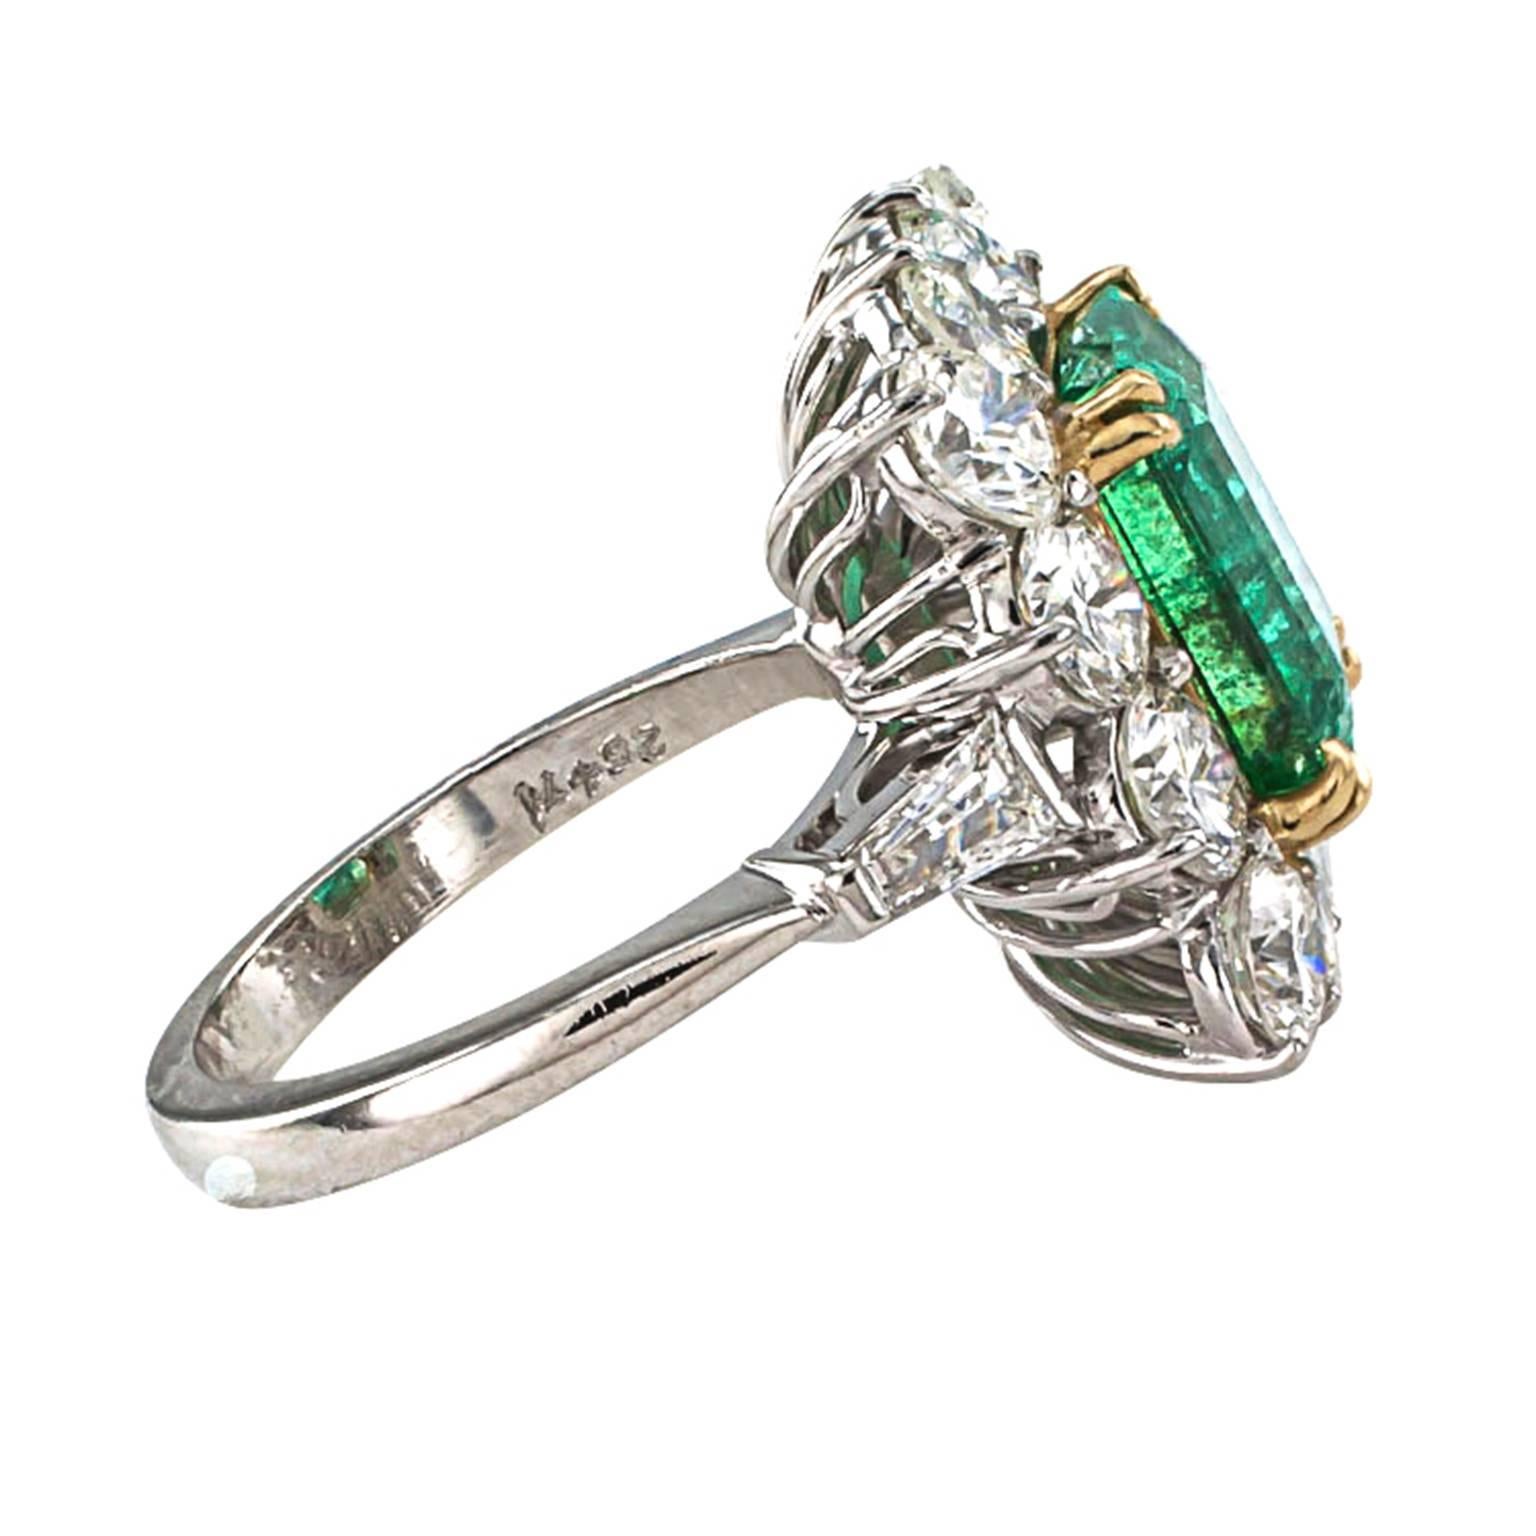 Emerald and Diamond Cocktail Ring Circa 1950

What can be said about this emerald and diamond ring that isn't perfectly obvious by just looking at it. It is a show piece all on its own.  An important platinum and 18 karat yellow gold jewel